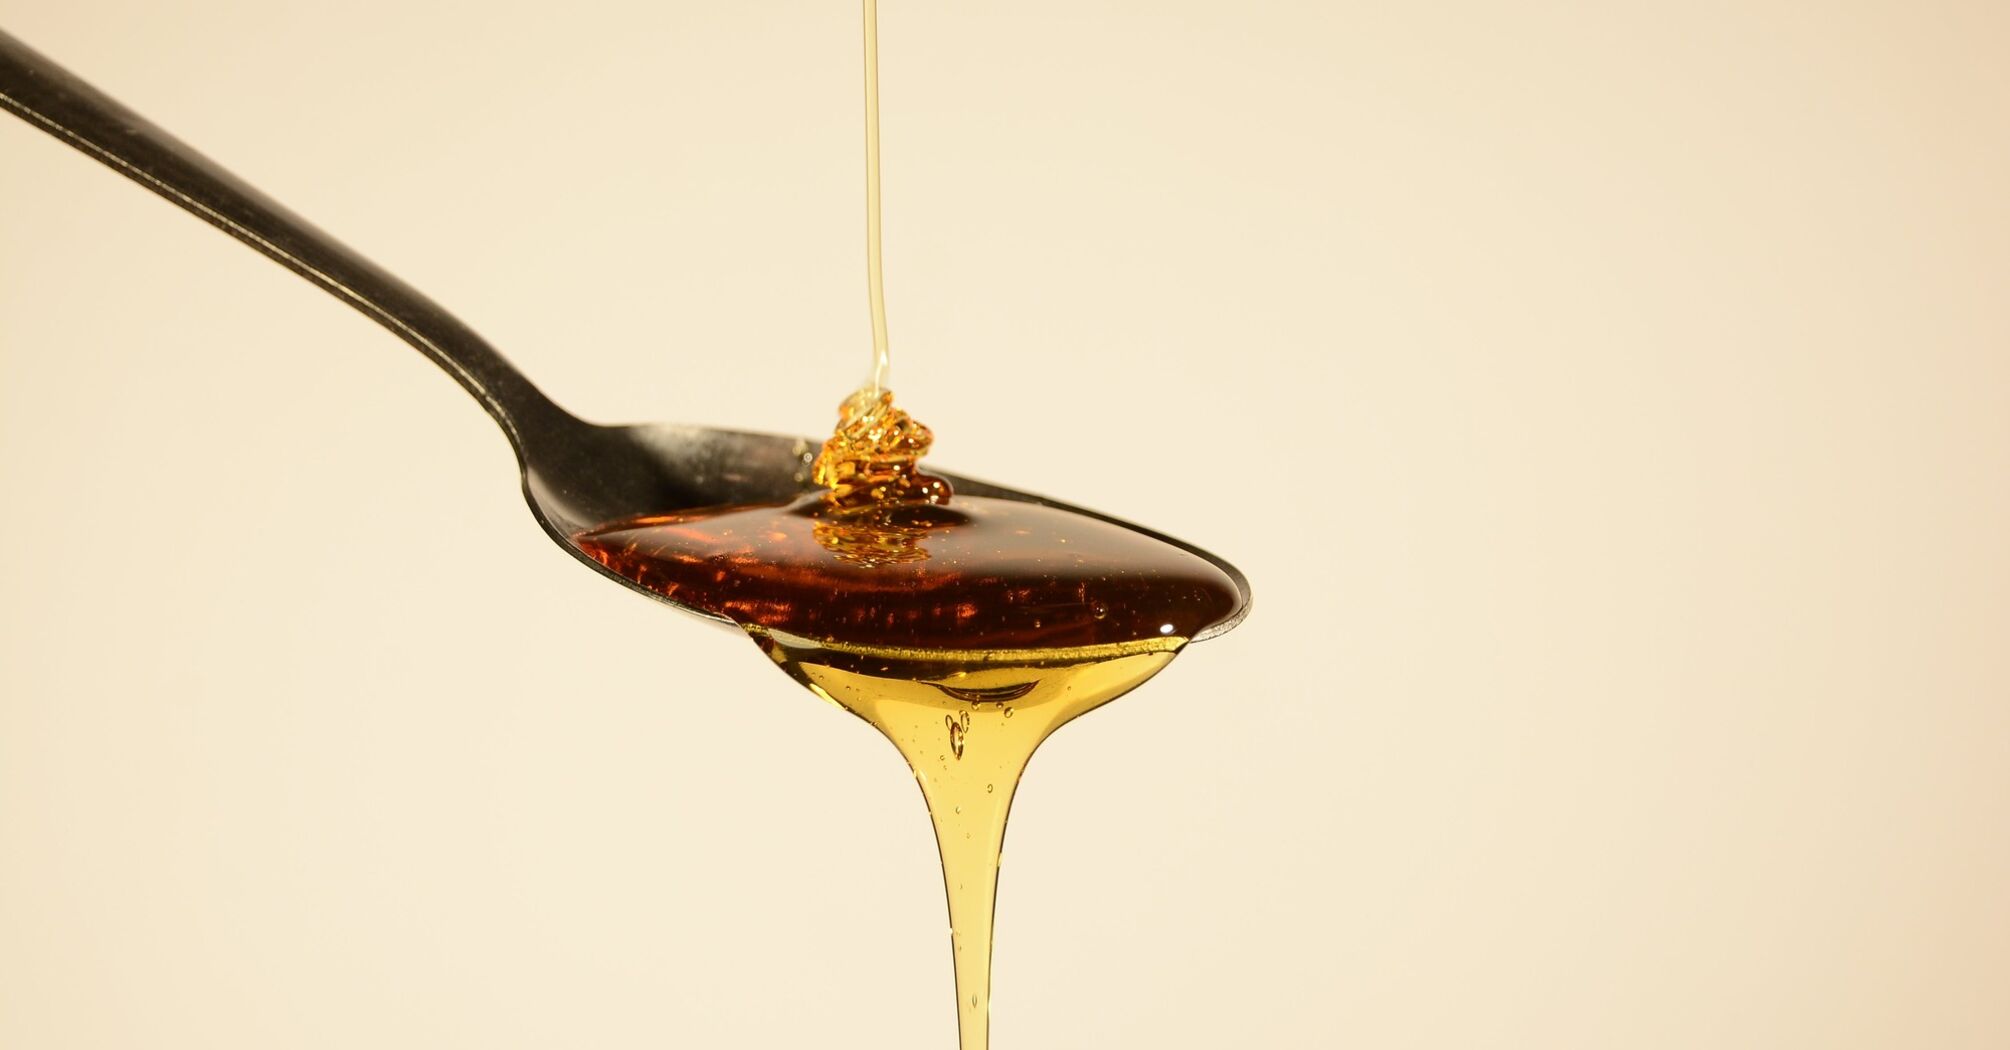 How to check the authenticity of honey?